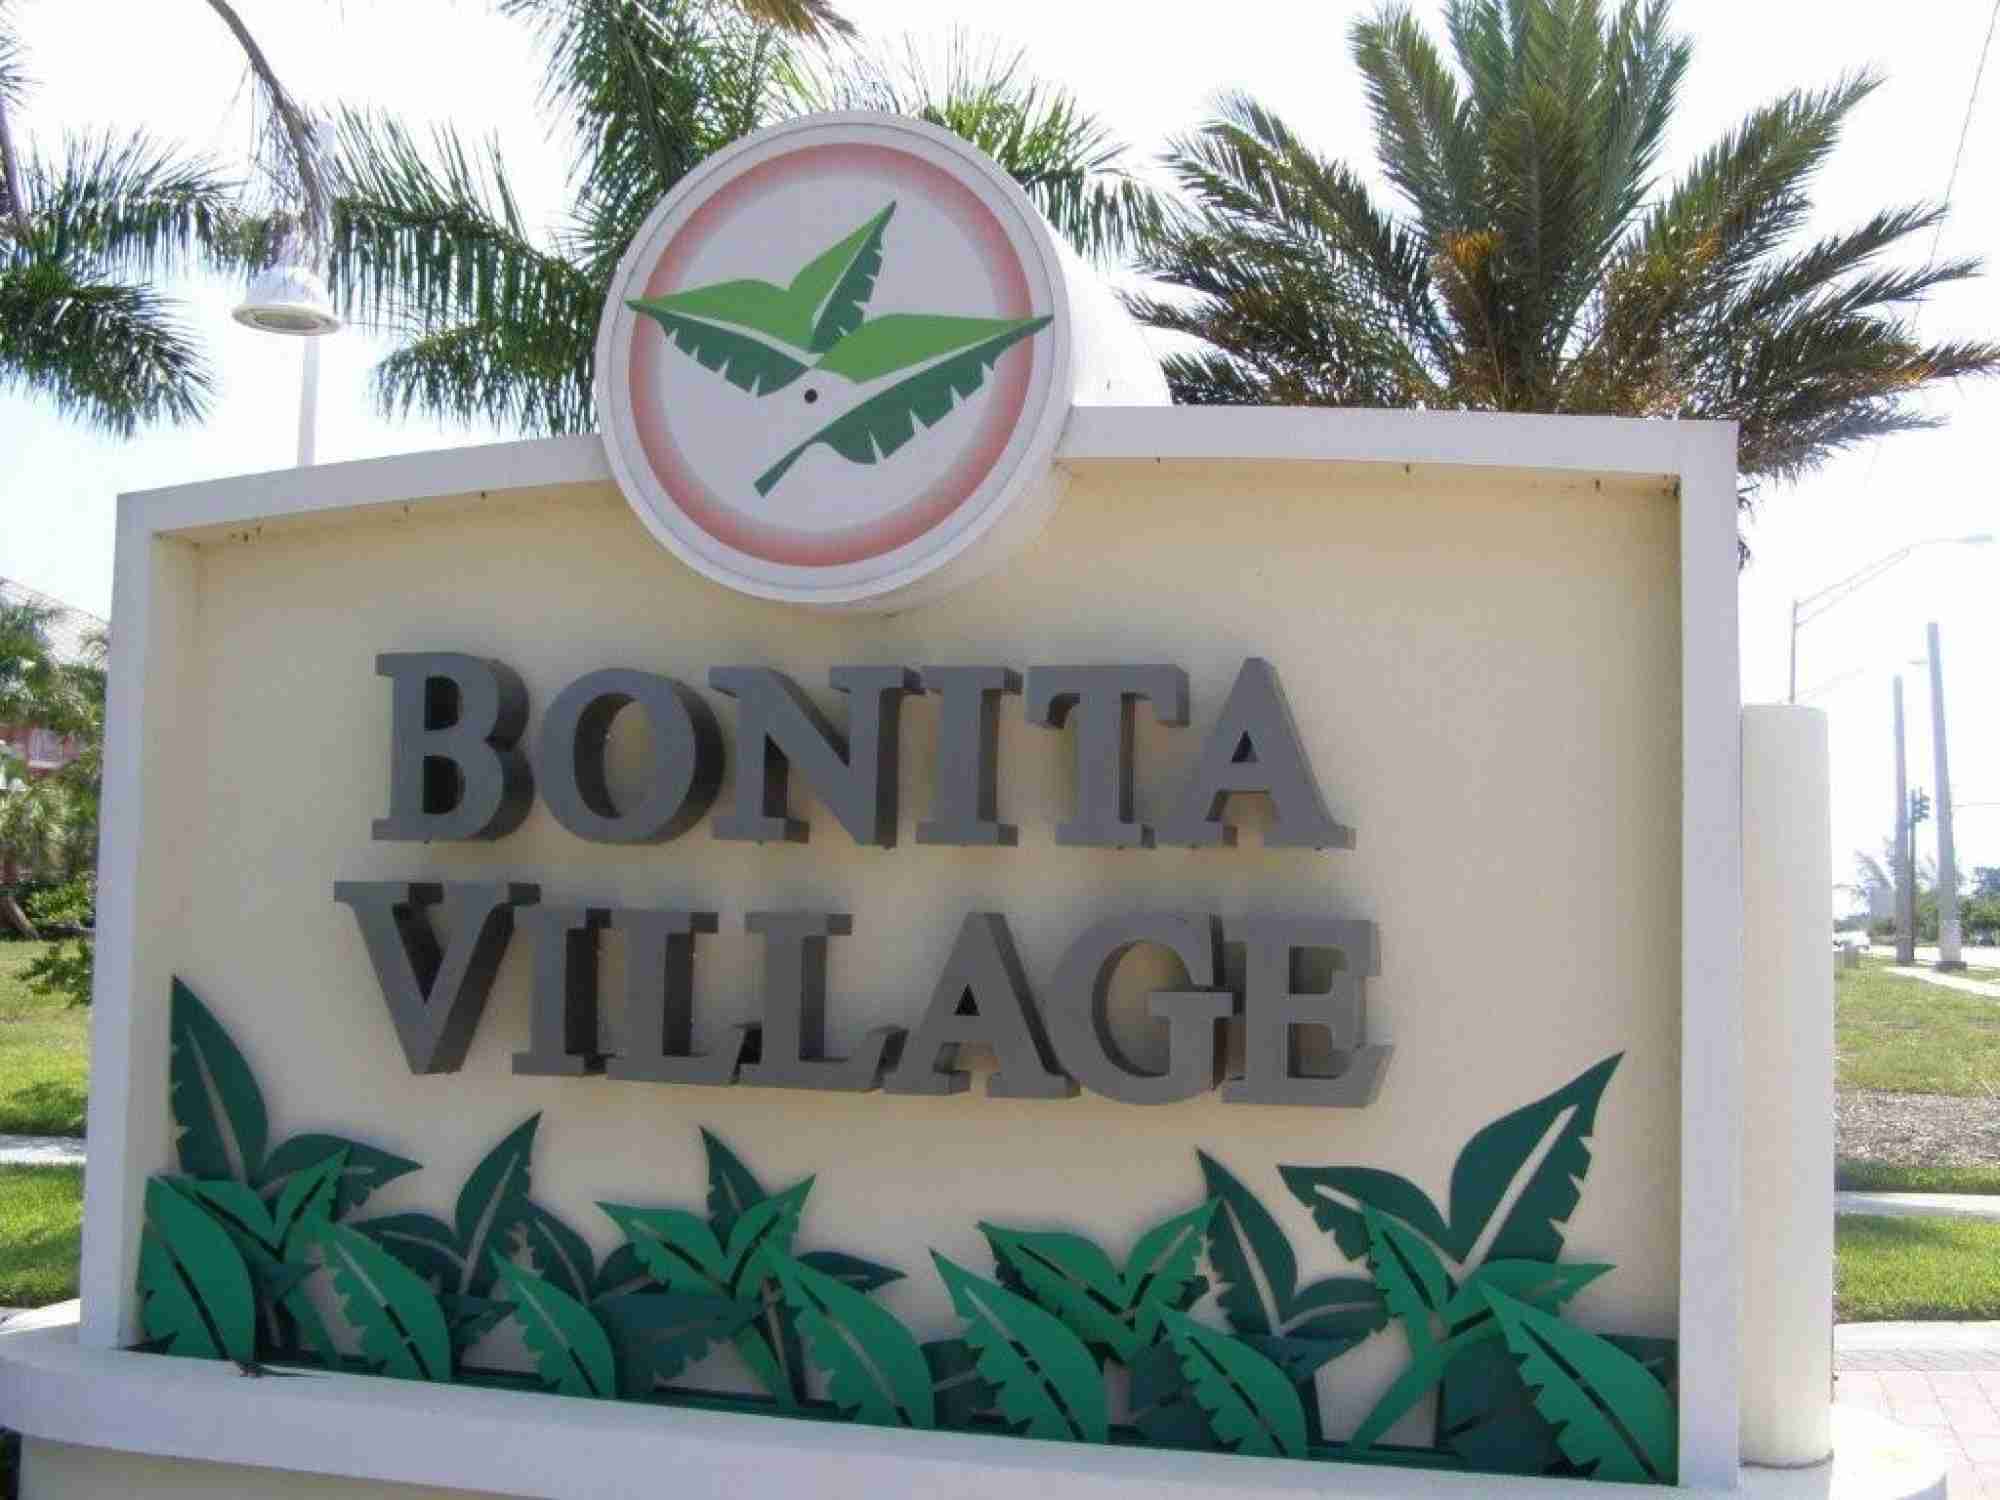 Bonita Village is in the center of everything you will want to do when in Florida!